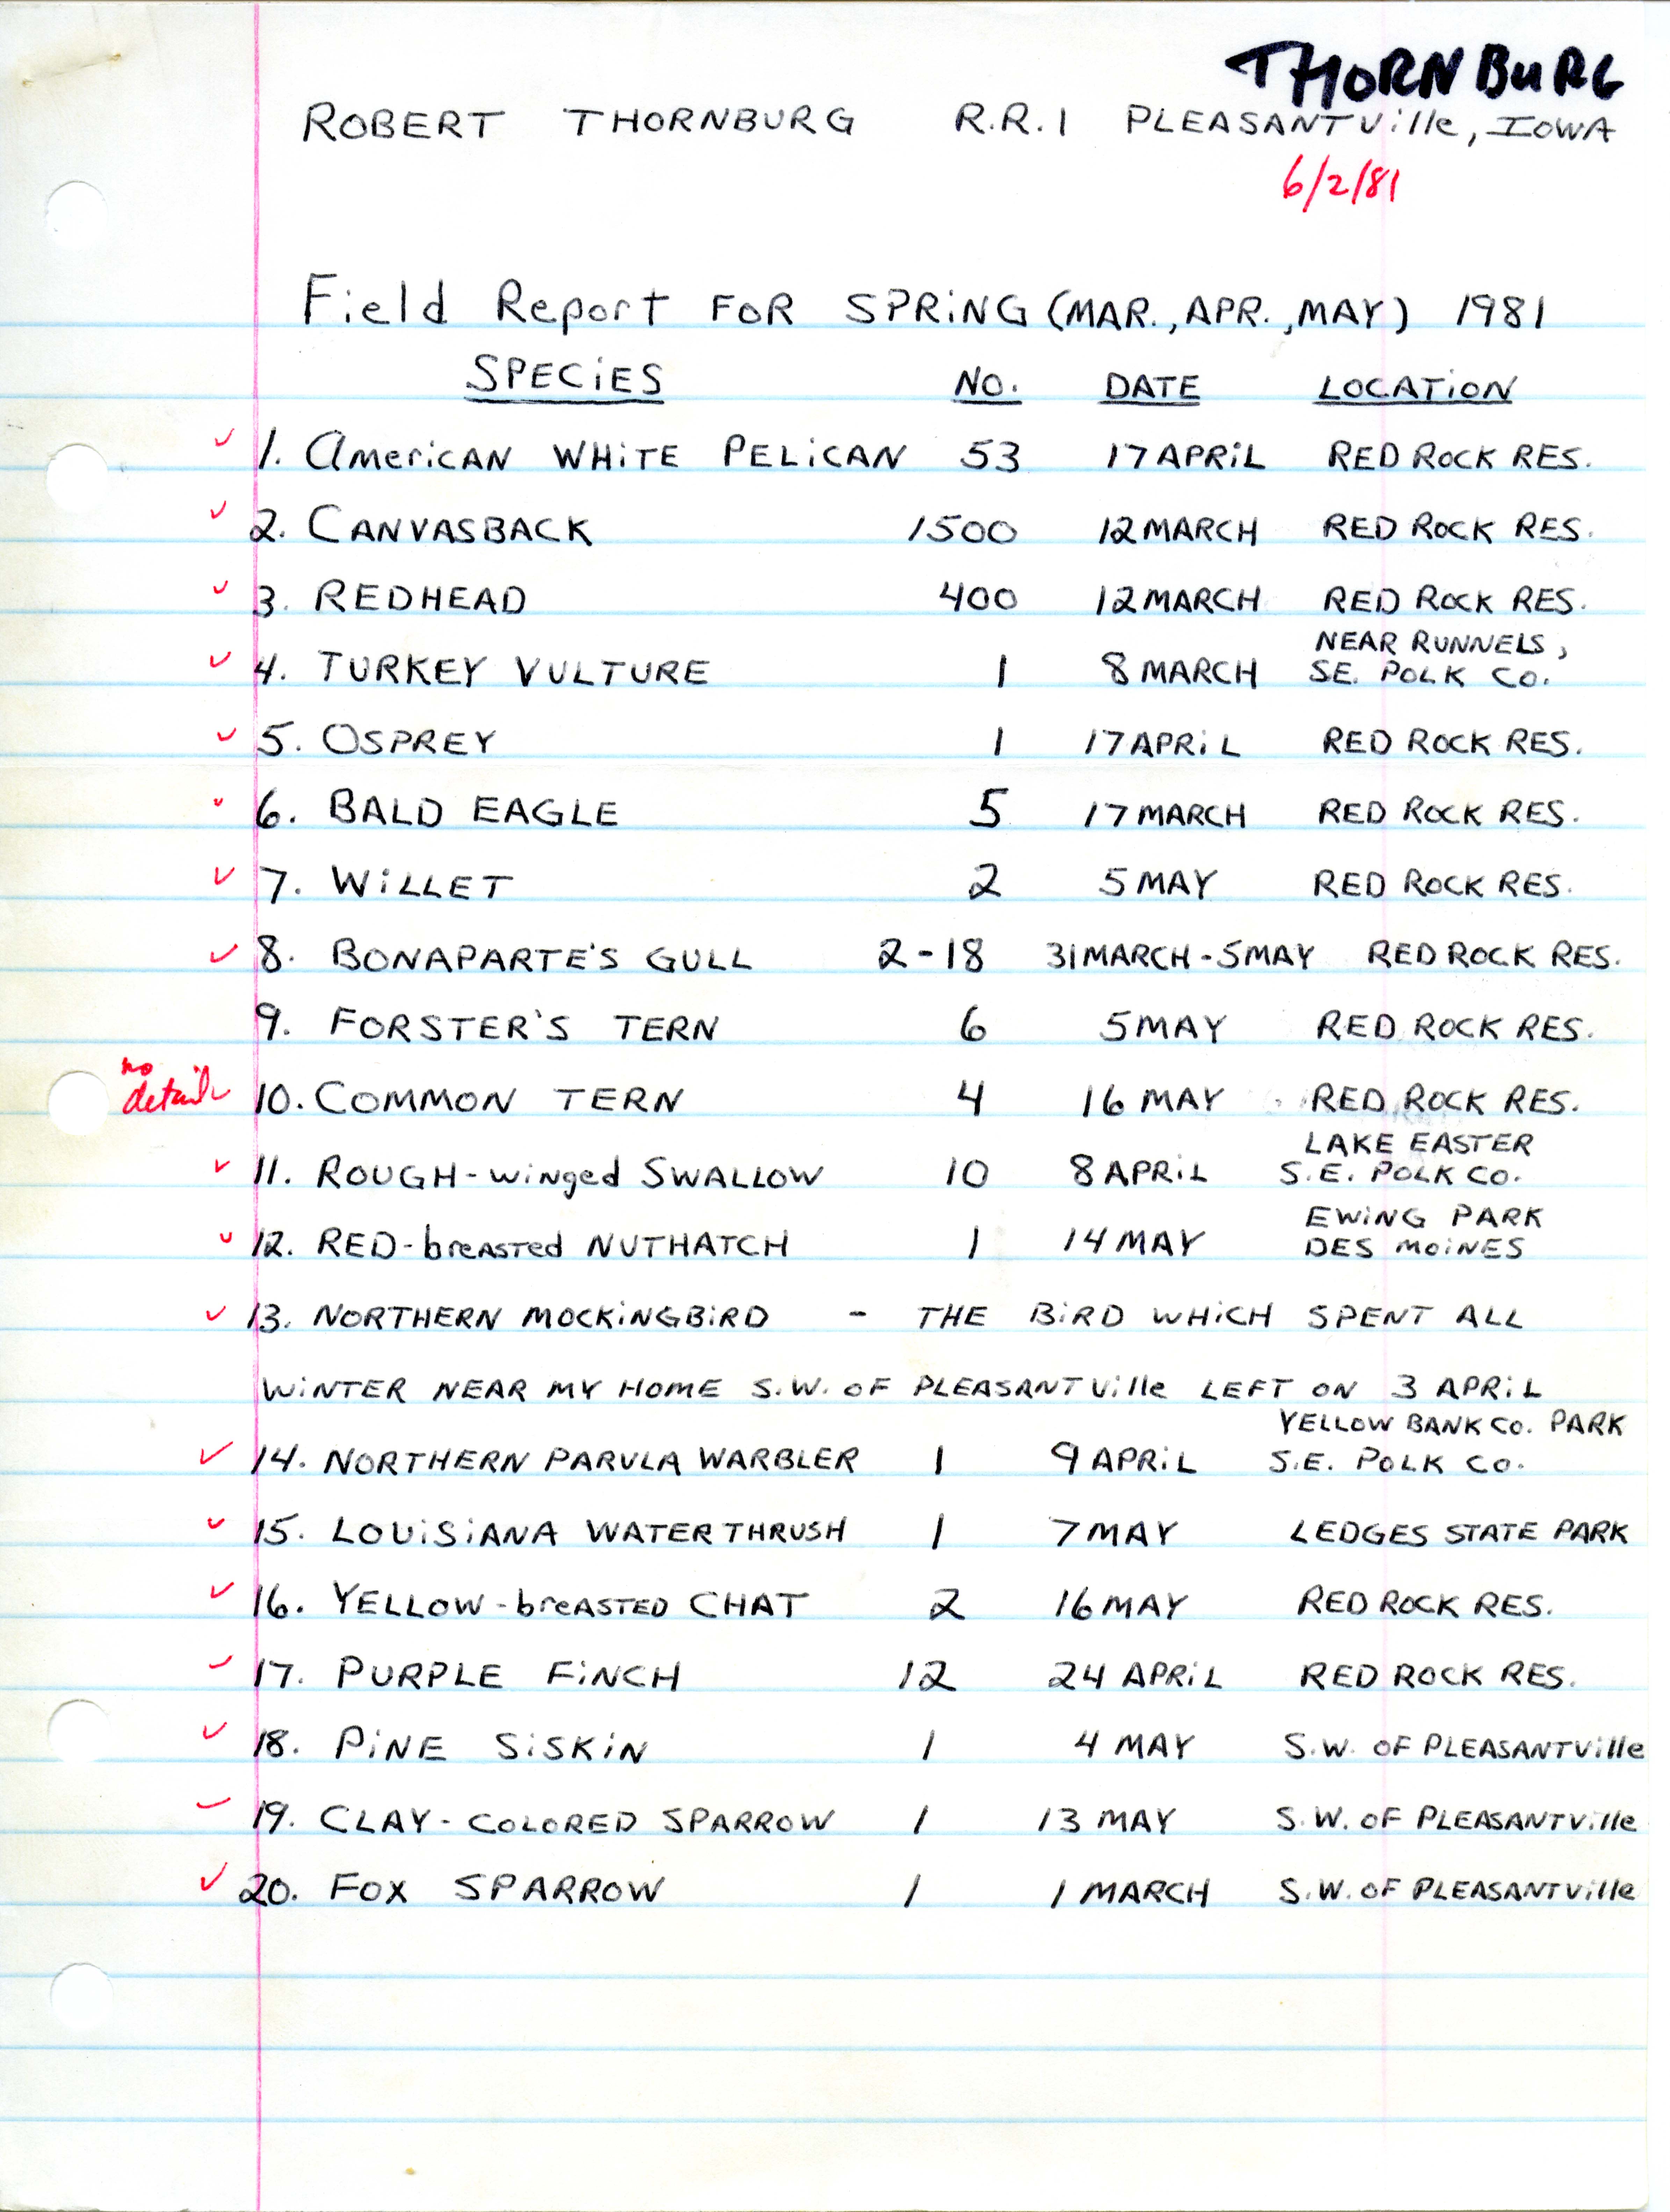 Field report for spring 1981